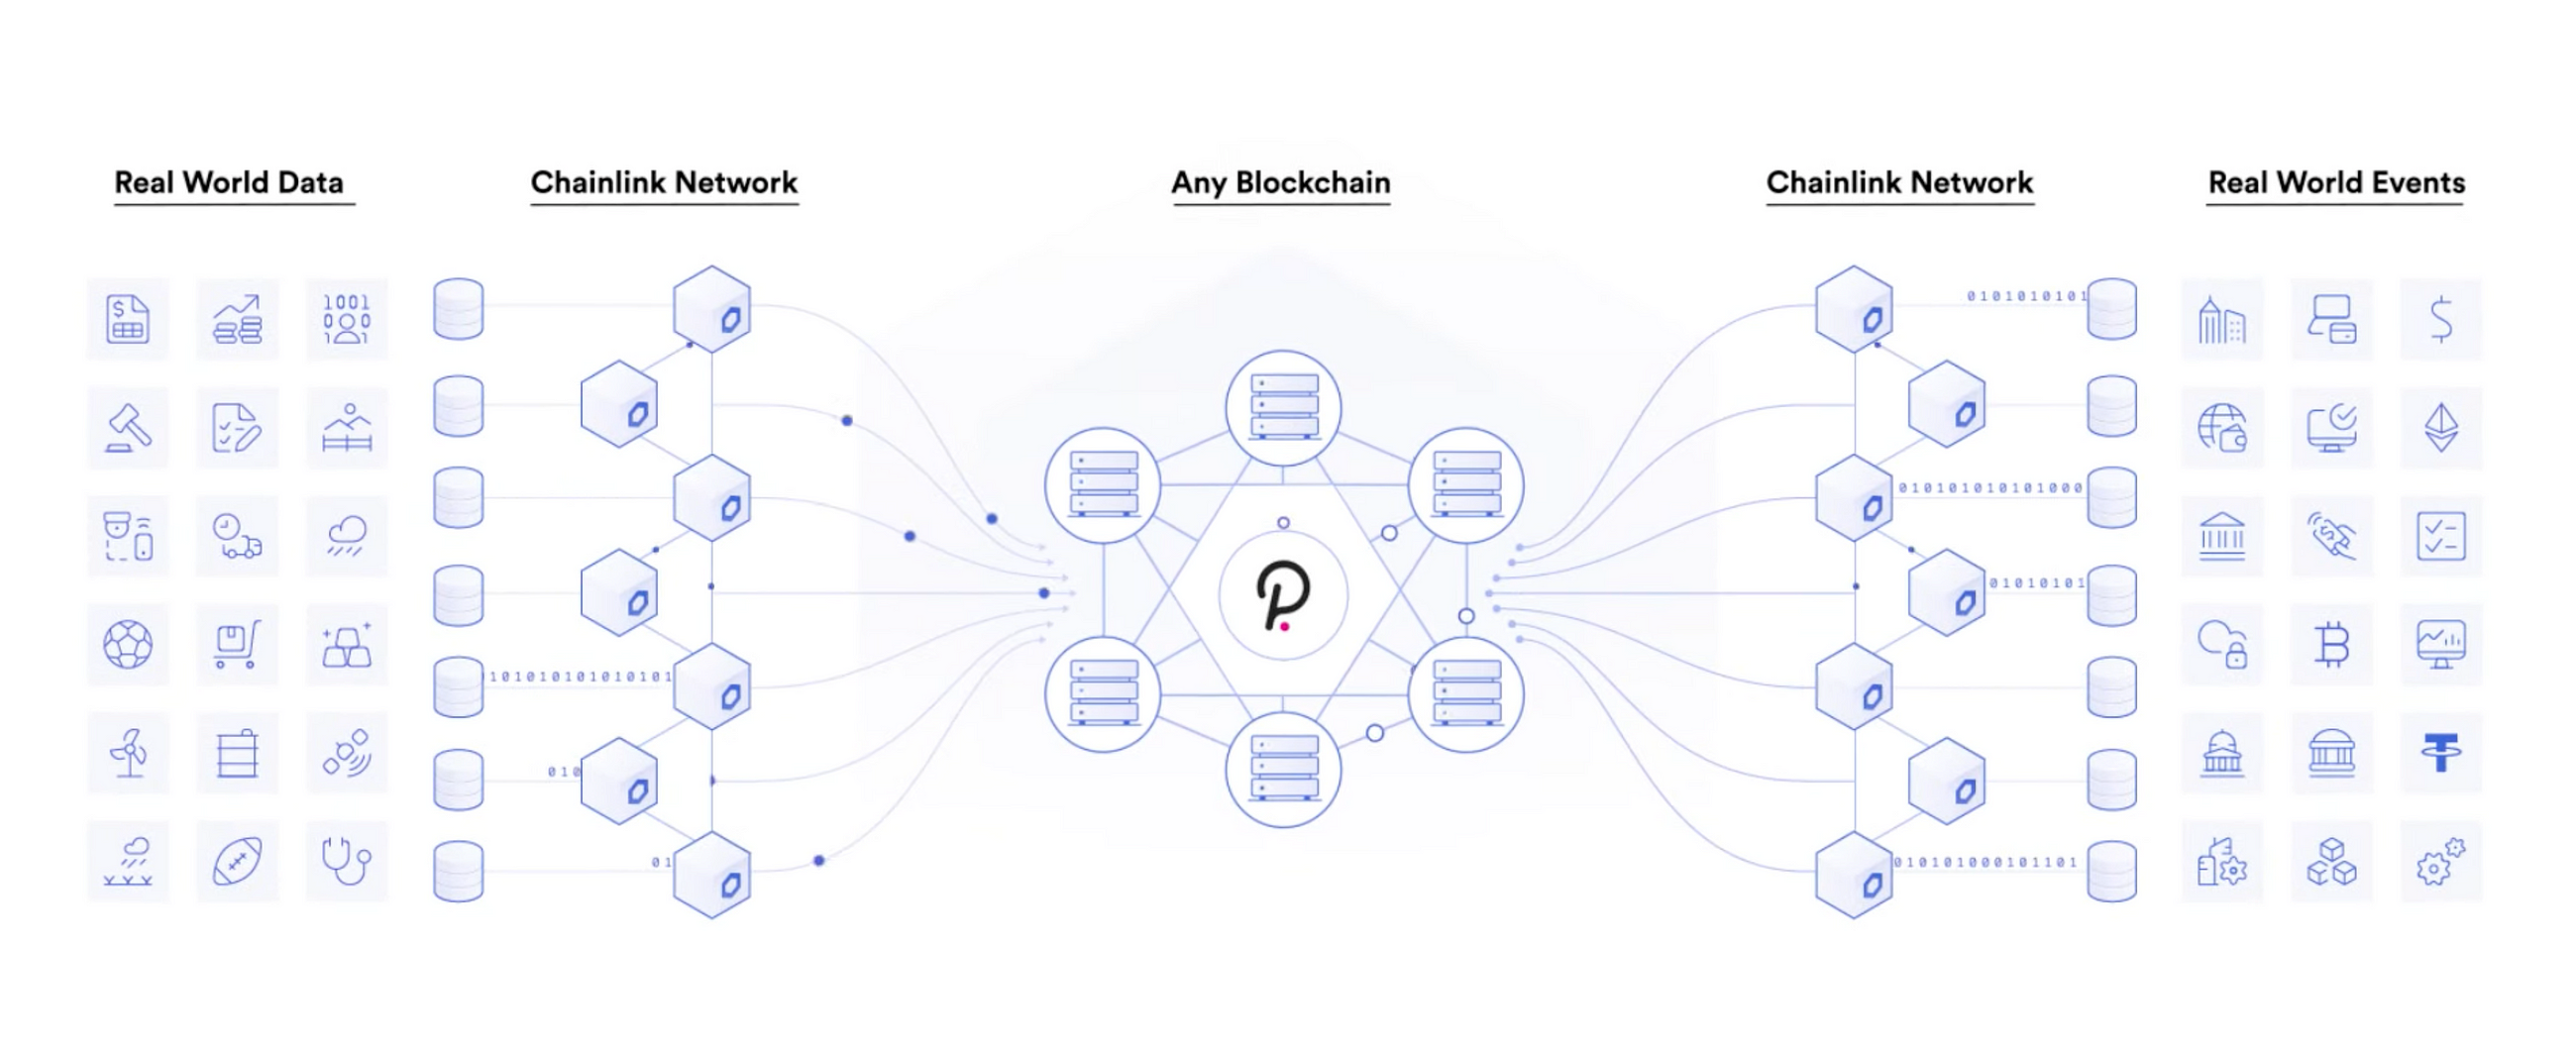 Showcasing how the Real World data is brought on-chain using chainlink oracle network